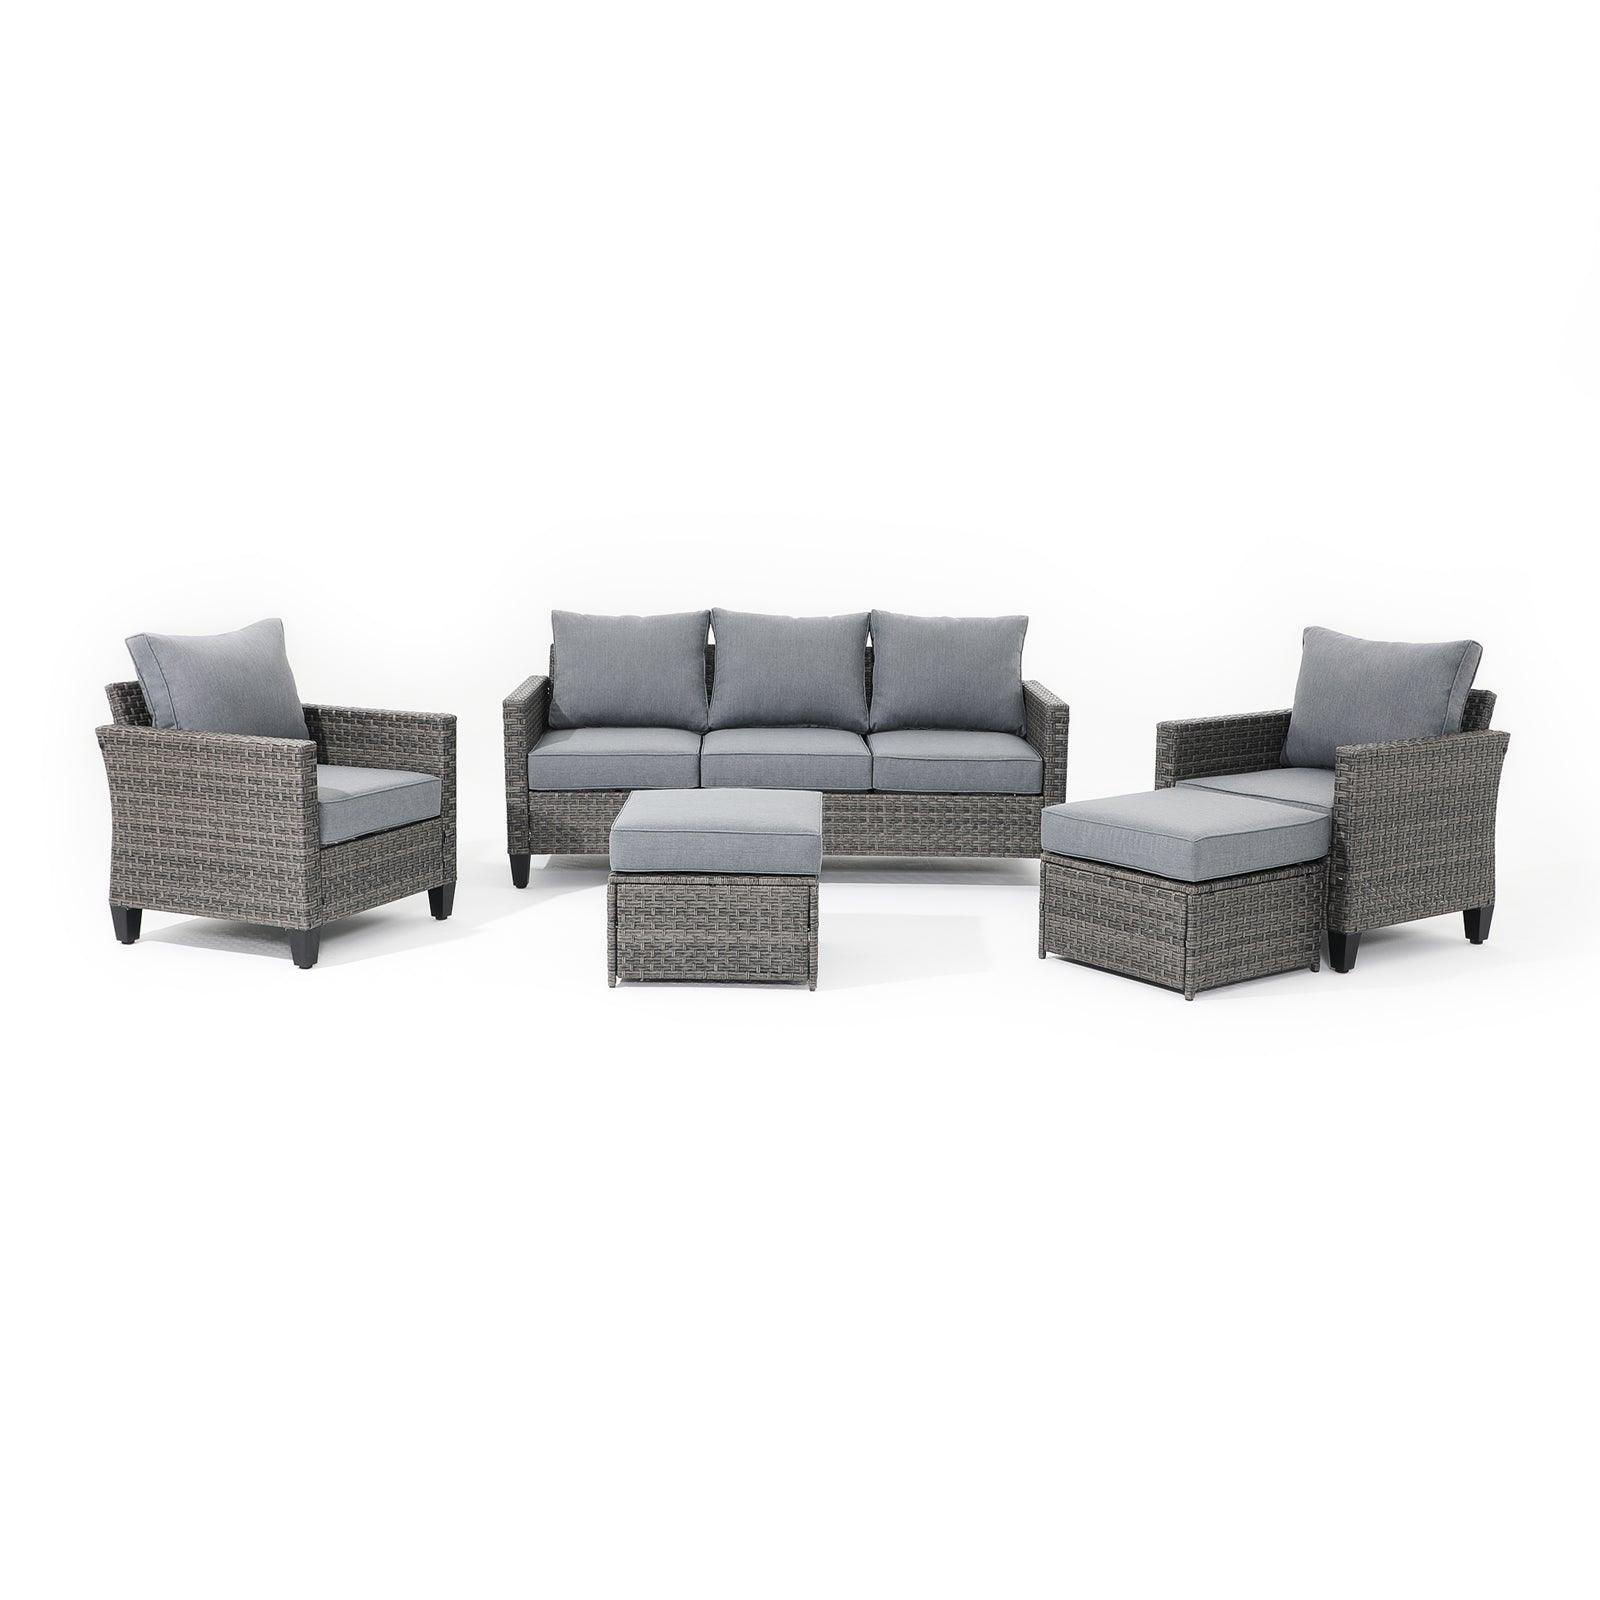 Ayia 5-Piece Grey wicker outdoor Sofa Set with grey cushions, a 3-seater sofa, 2 arm chairs , 2 ottomans - Jardina Furniture  #color_Grey#piece_5-pc. with ottomans